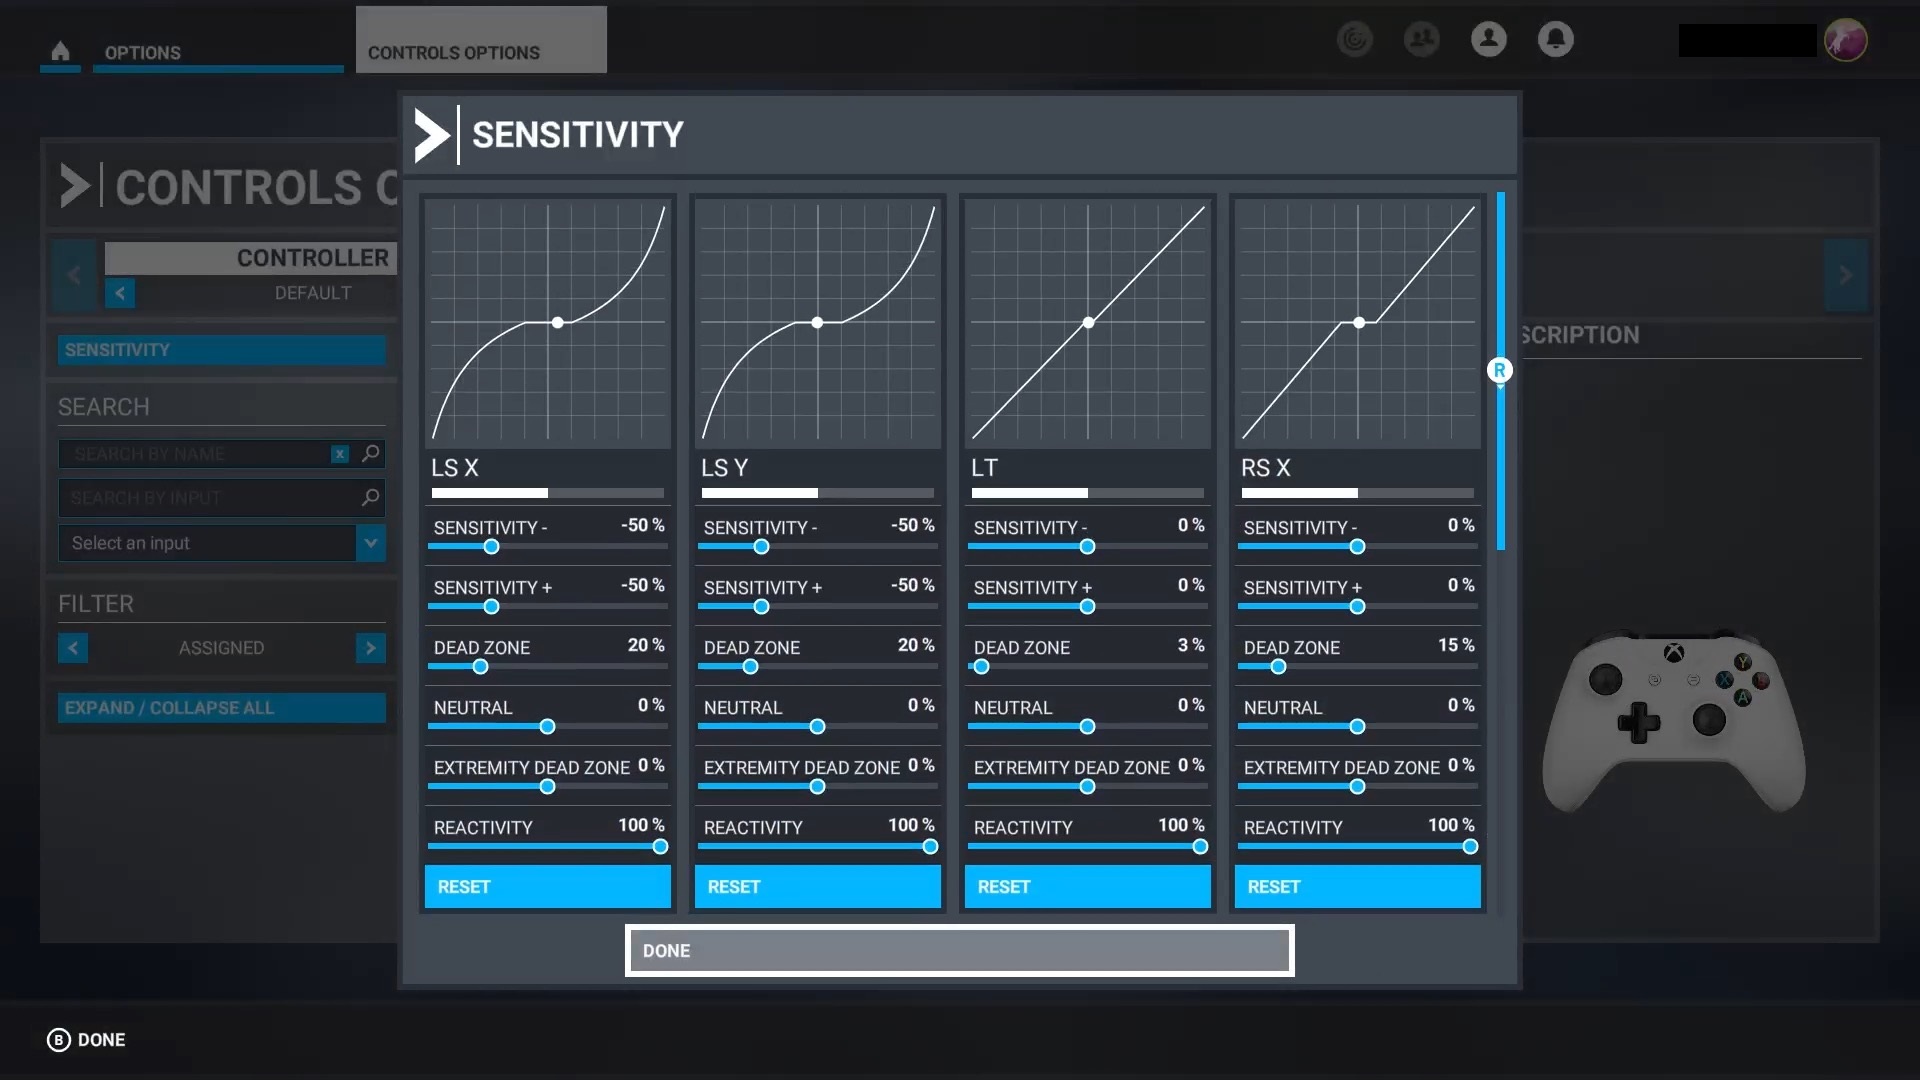 Screenshot of Flight Simulator Controls Options with Sensitivity section shown.  Displaying info about LS X, LS Y, LT and RS X.